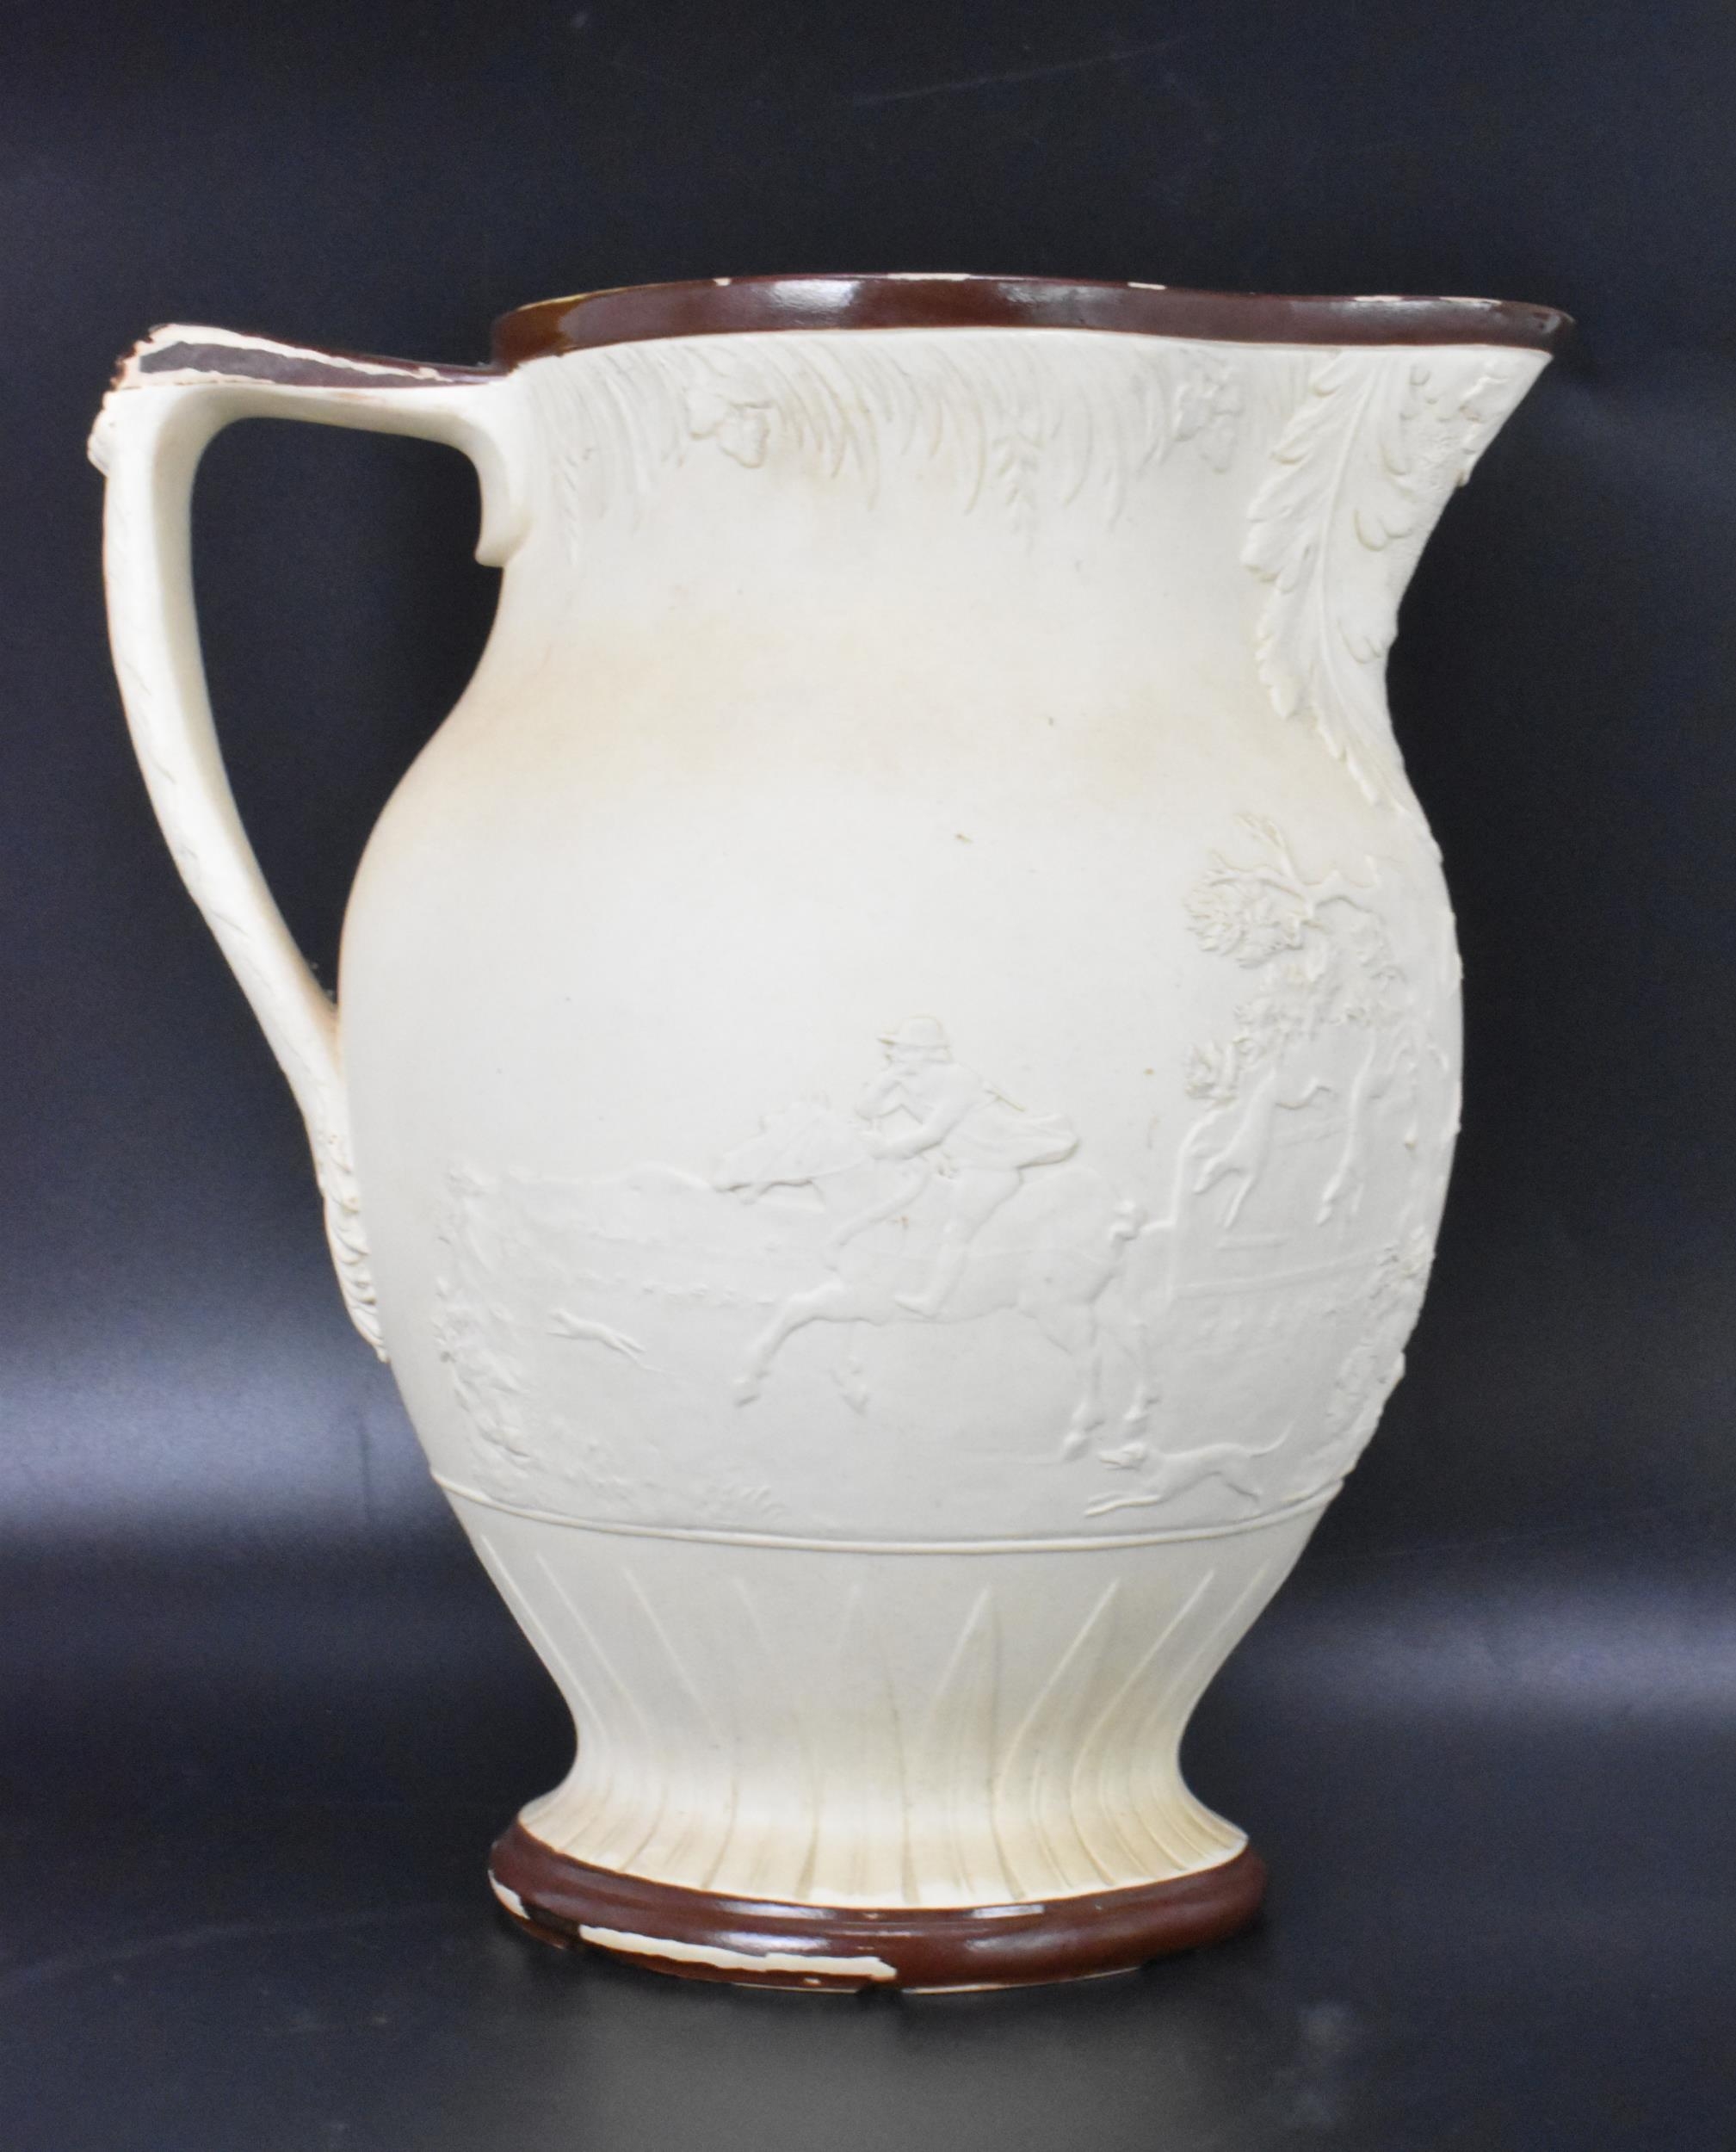 A circa 1800 Turner stoneware jug, moulded decoration depicting a hunting scene and with brown